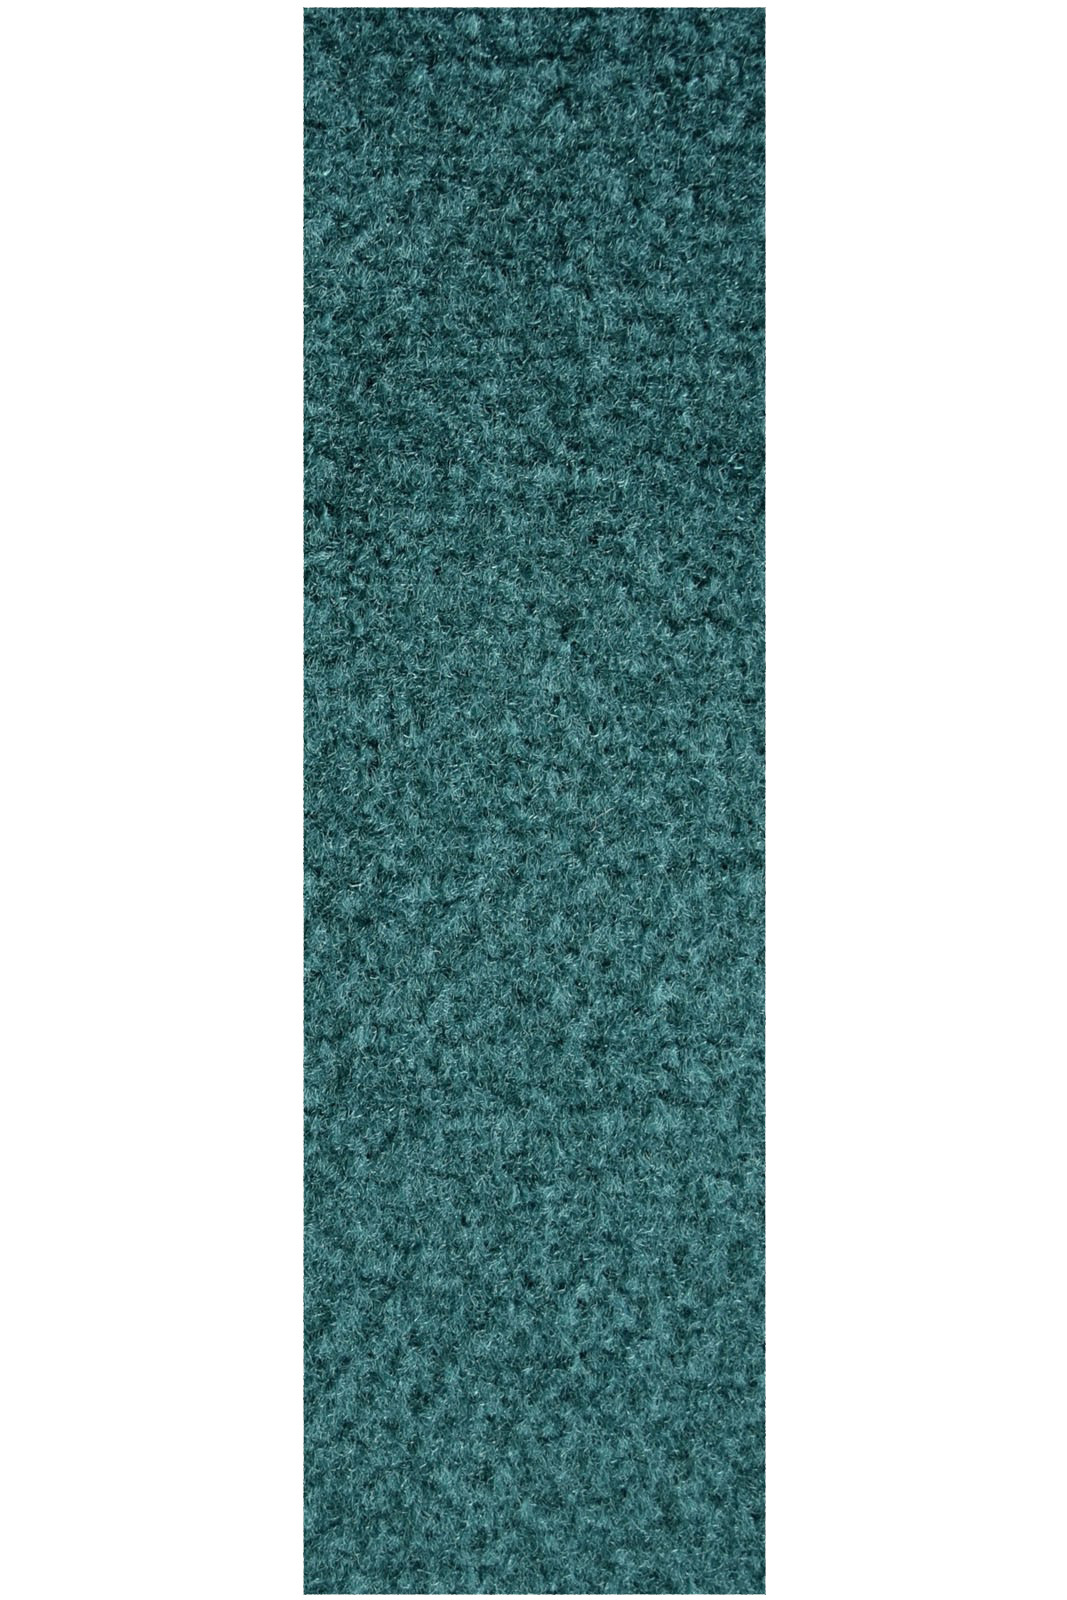 Commercial Indoor/Outdoor Teal Custom Size Runner 3'6" x42' - Area Rug with Rubber Marine Backing for Patio, Porch, Deck, Boat, Basement or Garage with Premium Bound Polyester Edges - image 1 of 1